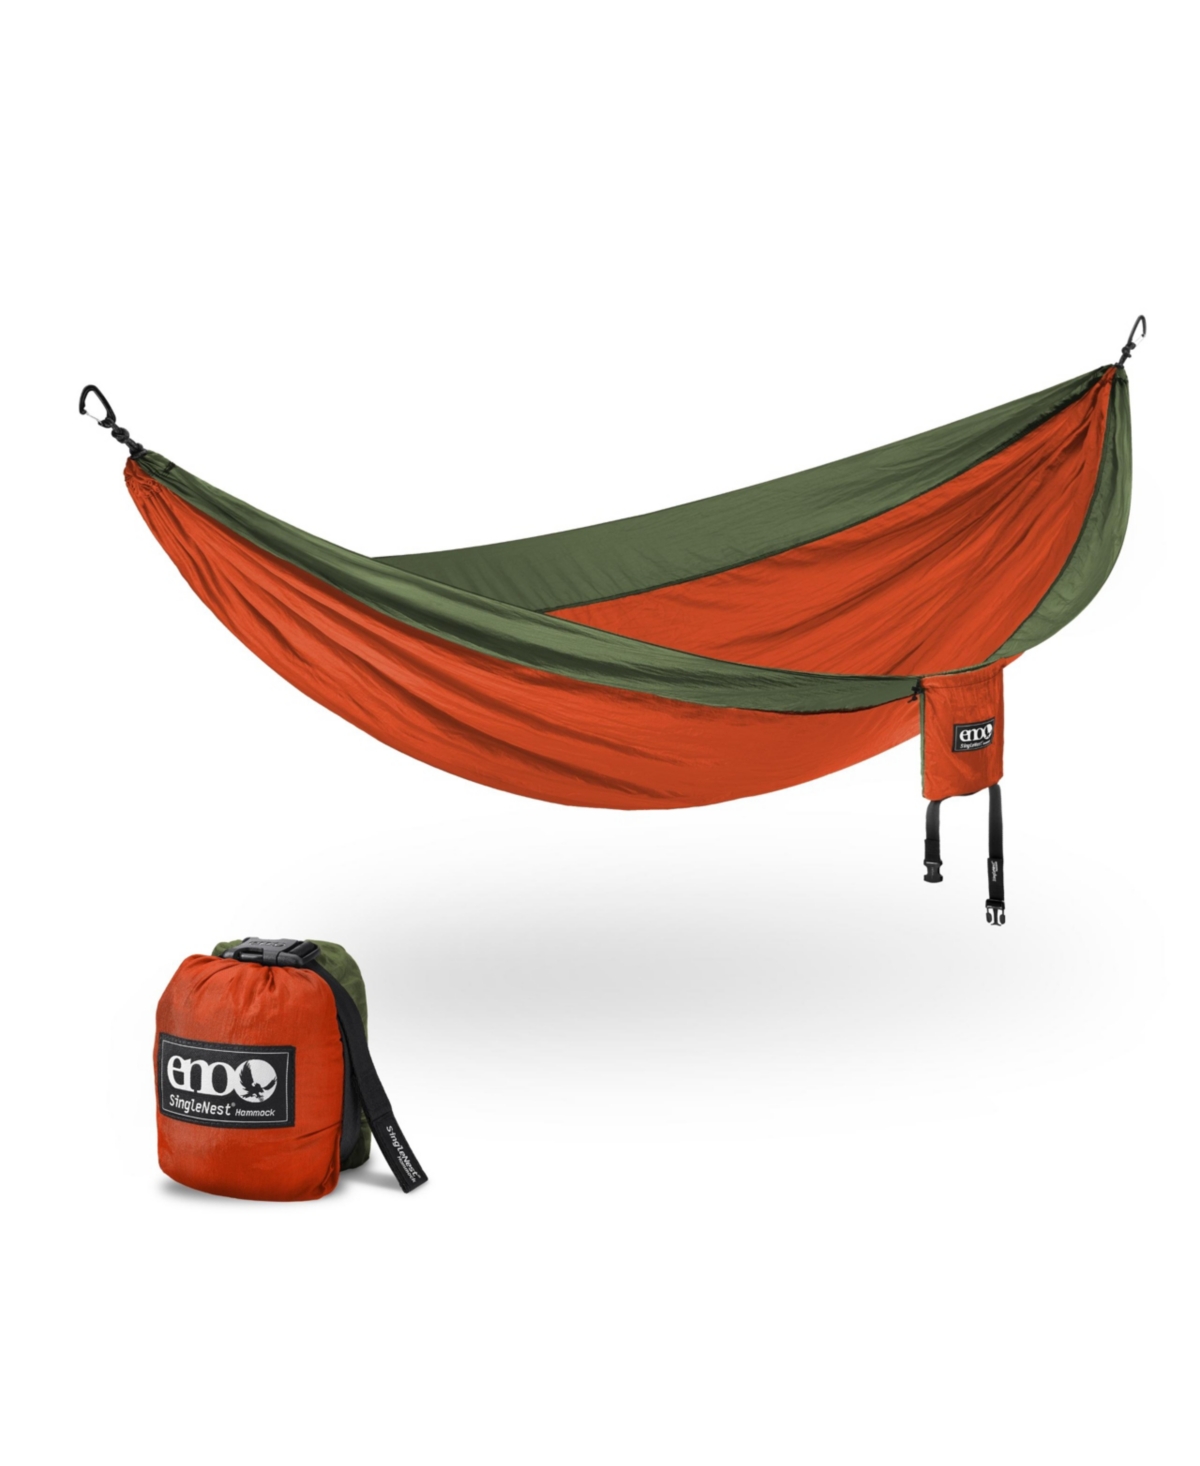 Eno SingleNest Hammock - Lightweight, 1 Person Portable Hammock - For Camping, Hiking, Backpacking, Travel, a Festival, or the Beach - Orange/Olive